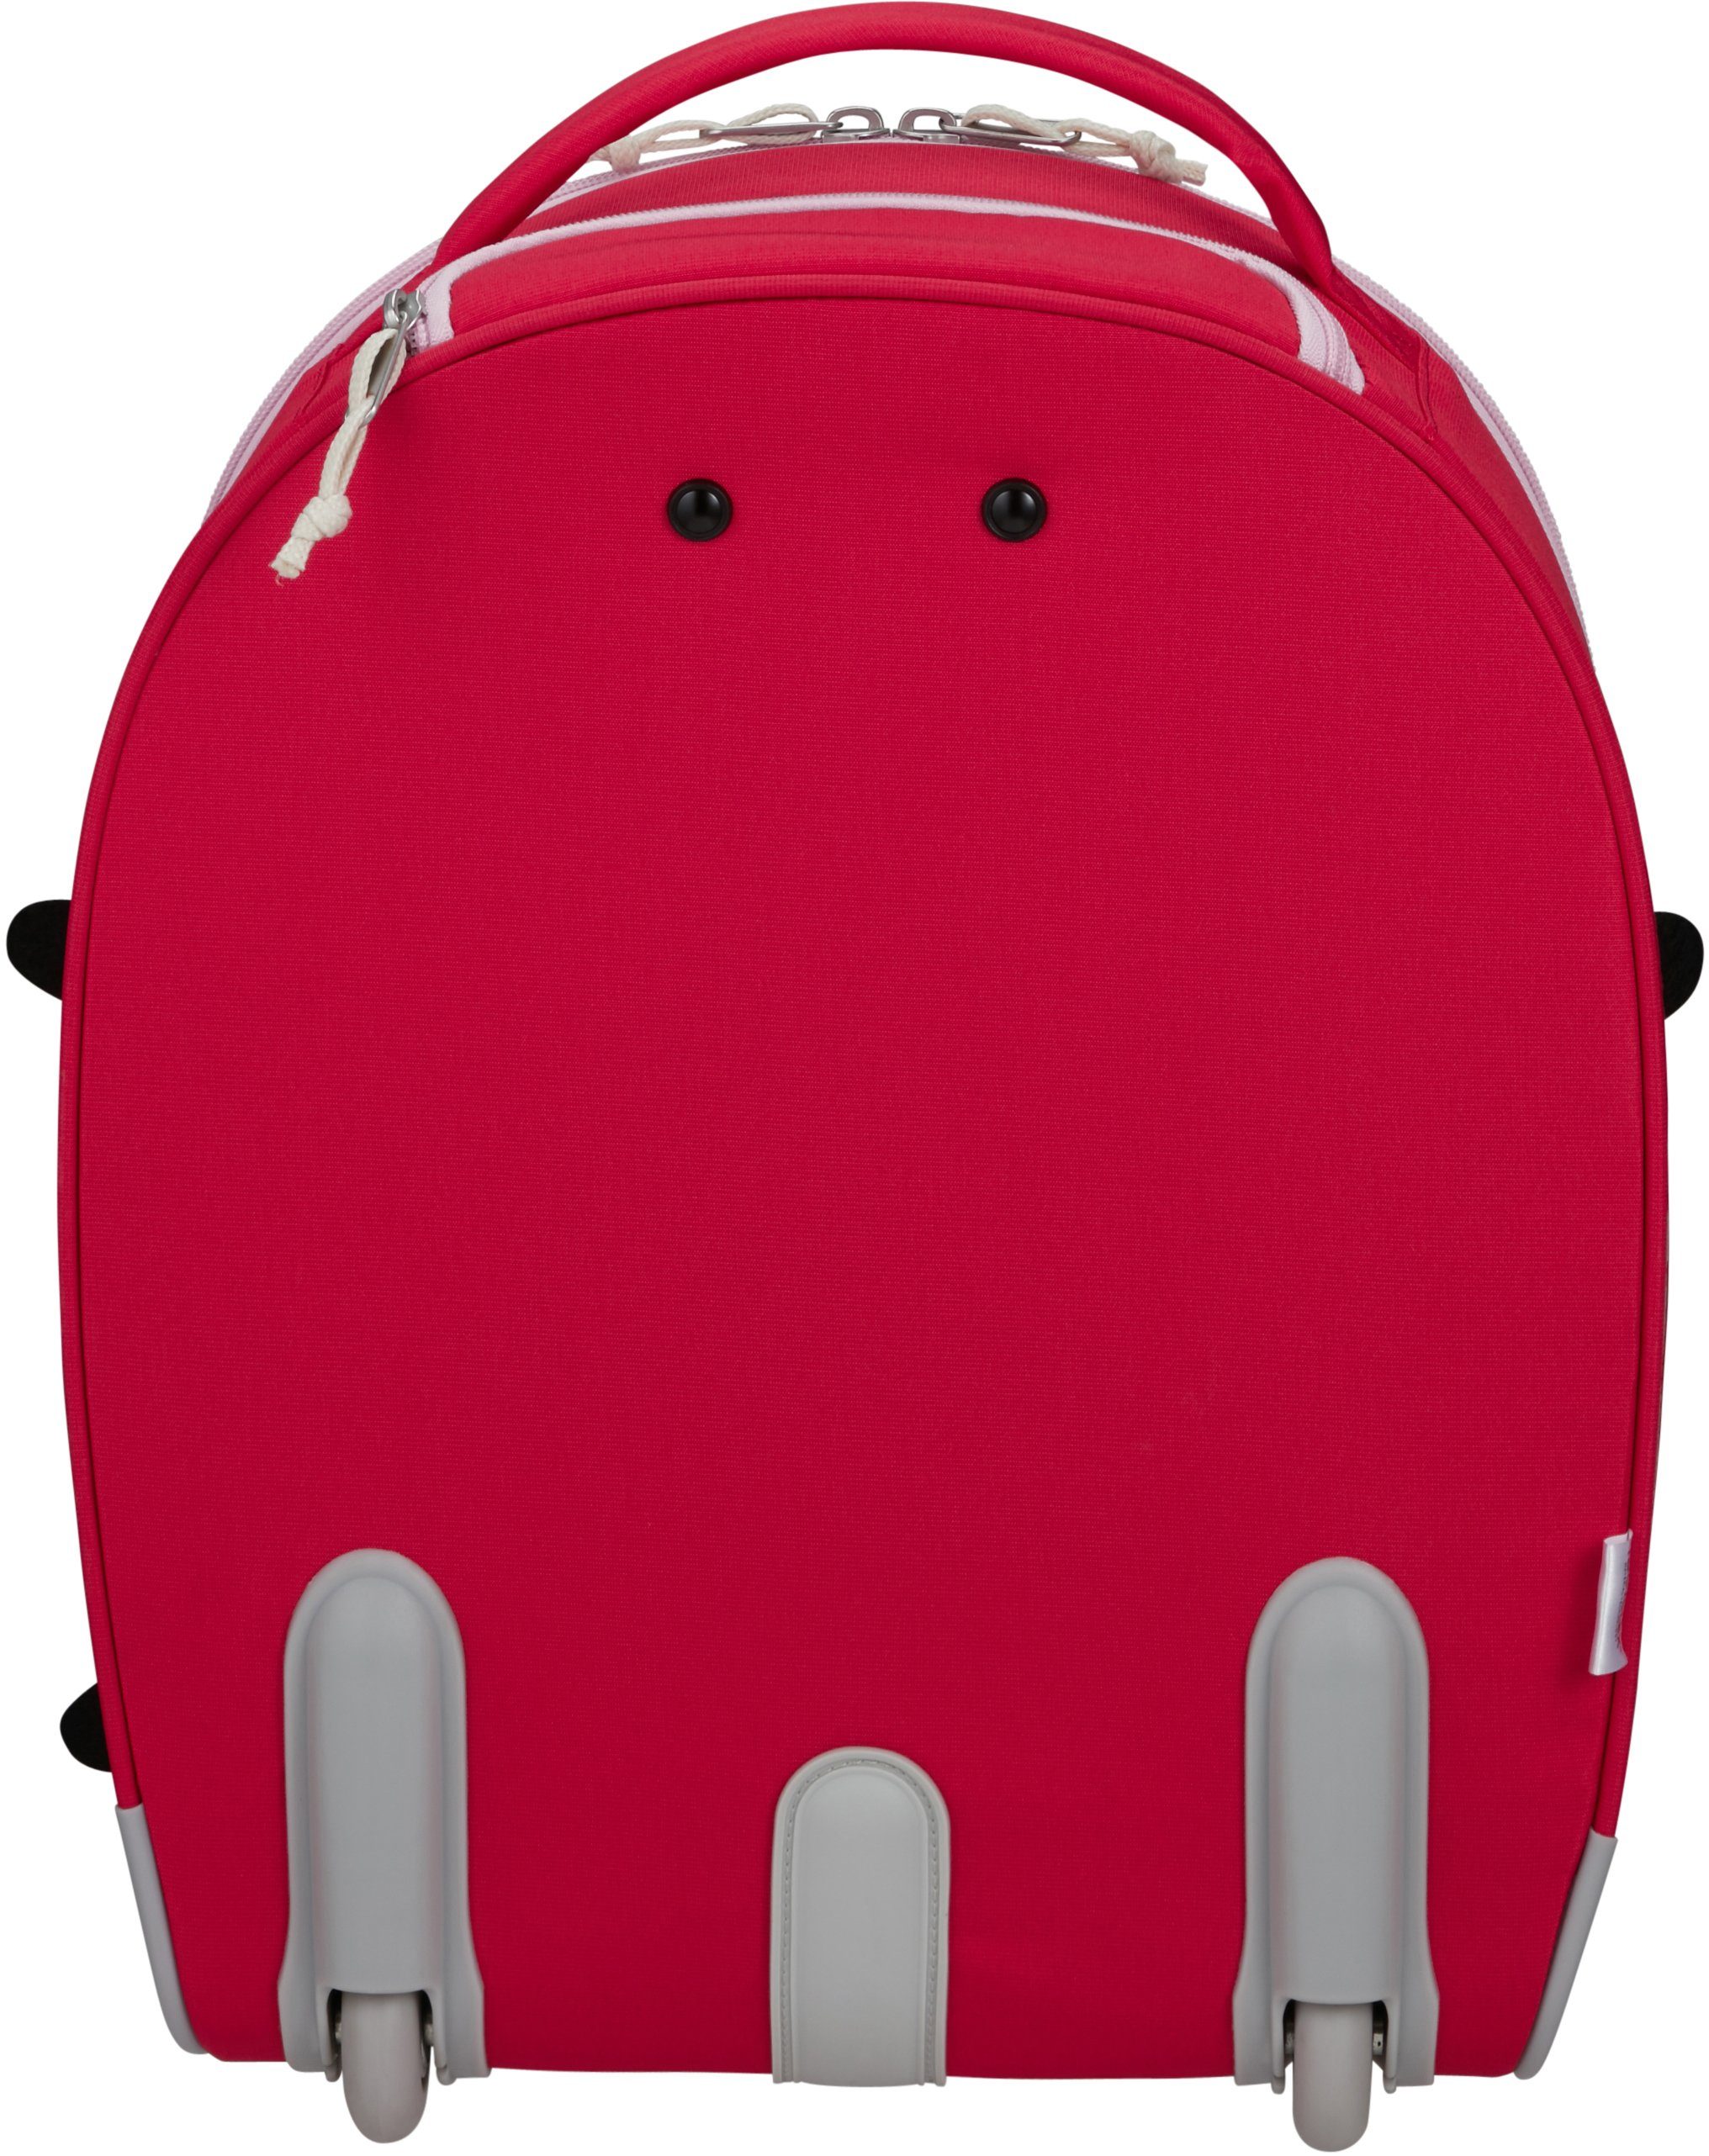 aus ECO, 2 Happy Samsonite Rollen, Ladybug Kinderkoffer Lally, Sammies recyceltem Material